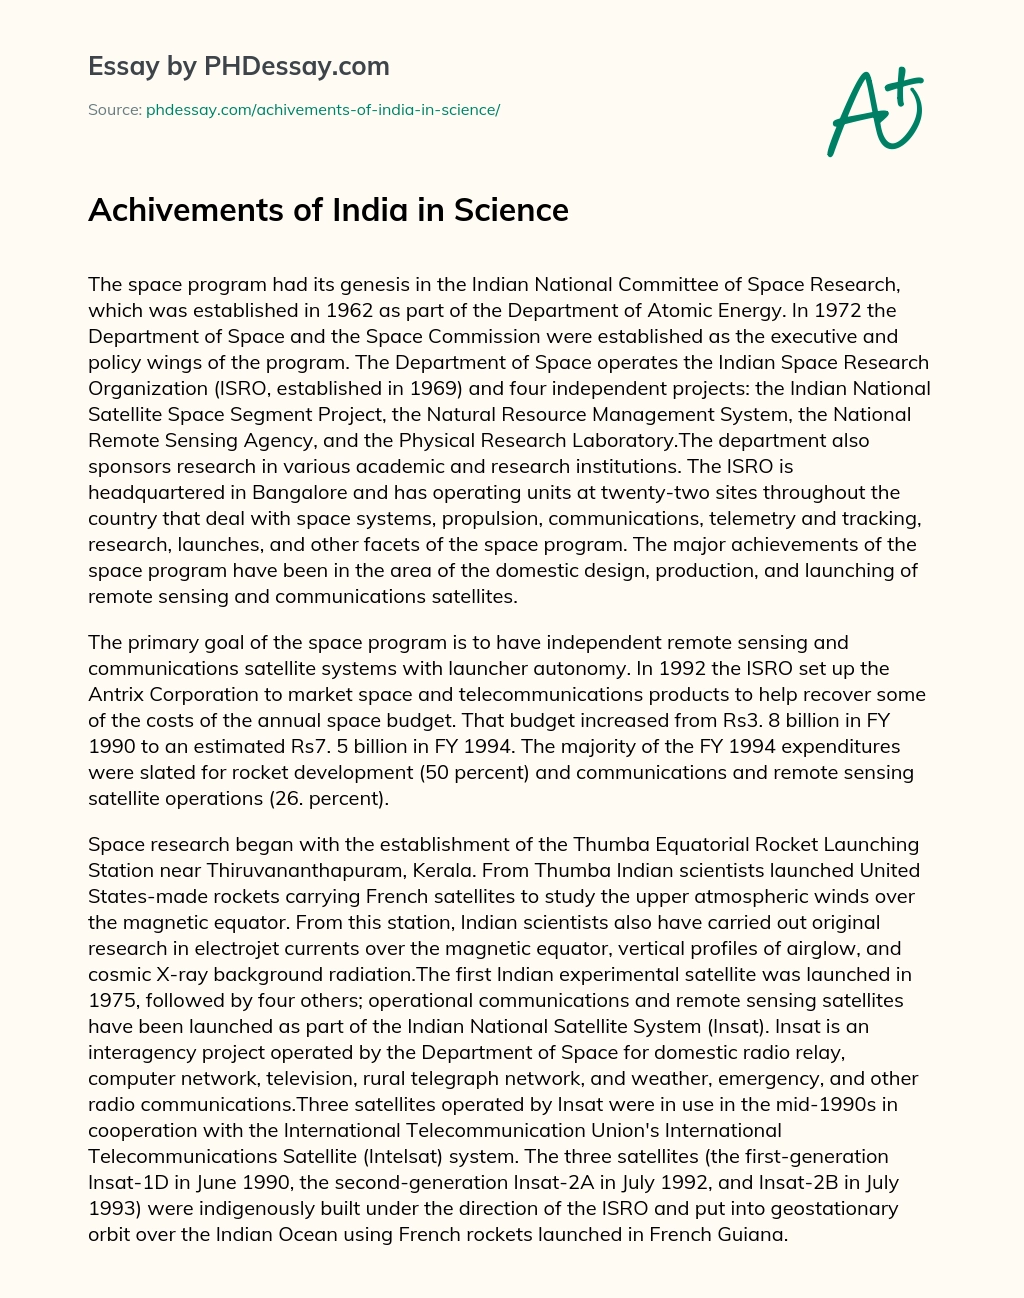 Achivements of India in Science essay